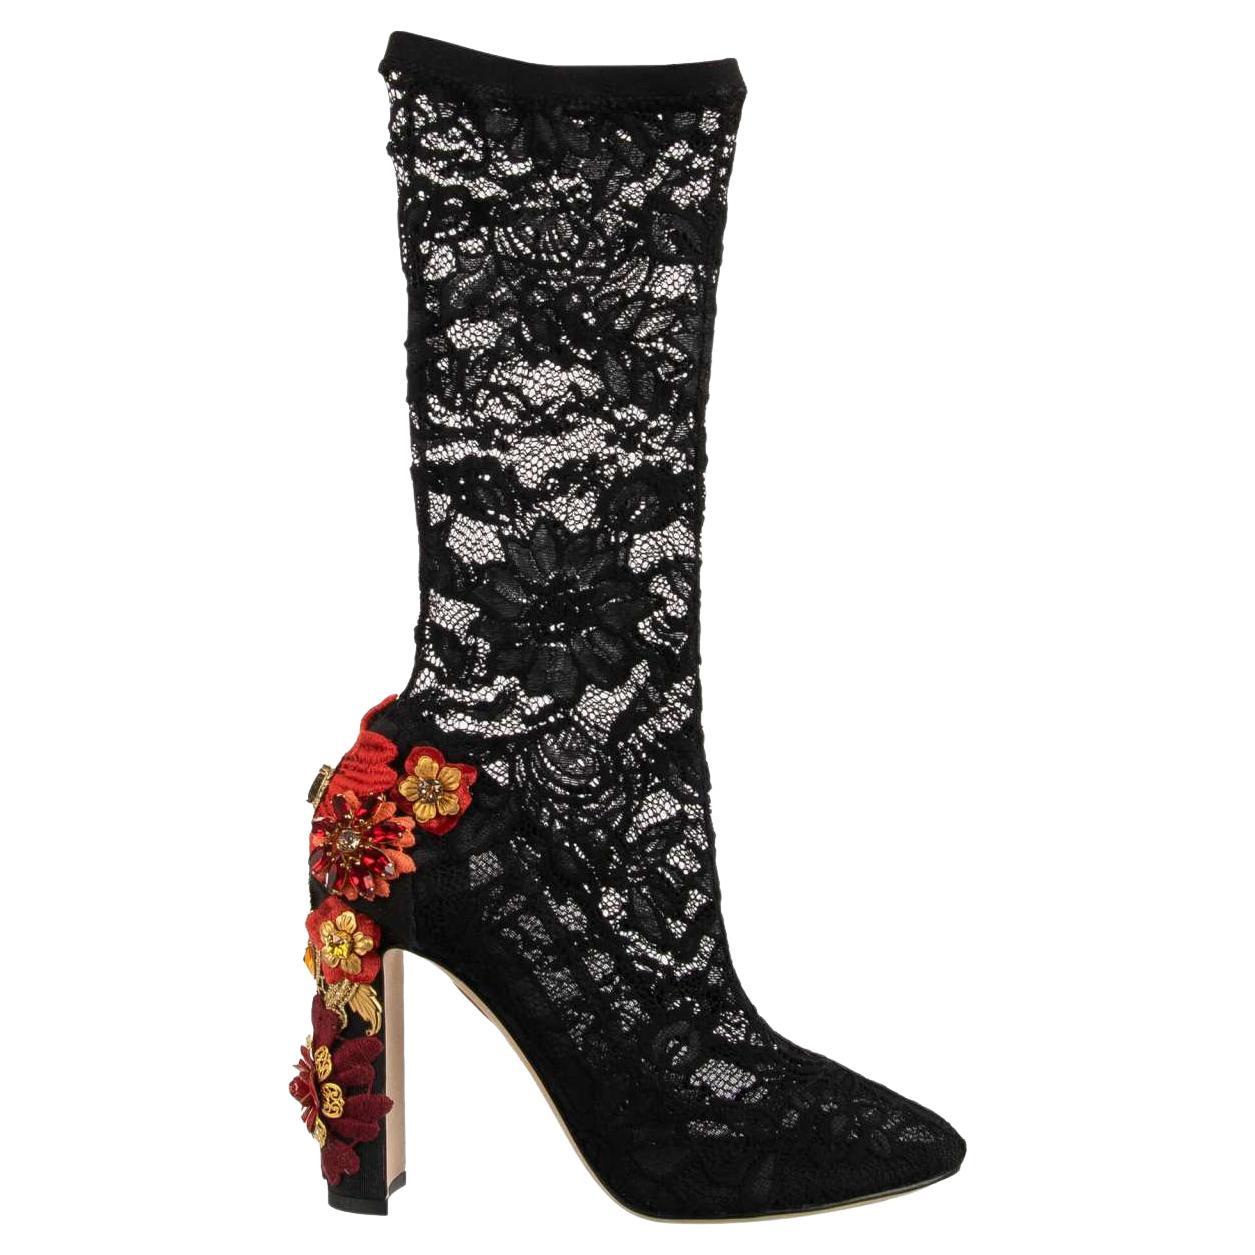 Dolce & Gabbana Crystal Flower Rose Lace Boots Pumps VALLY Black 40 10 For Sale